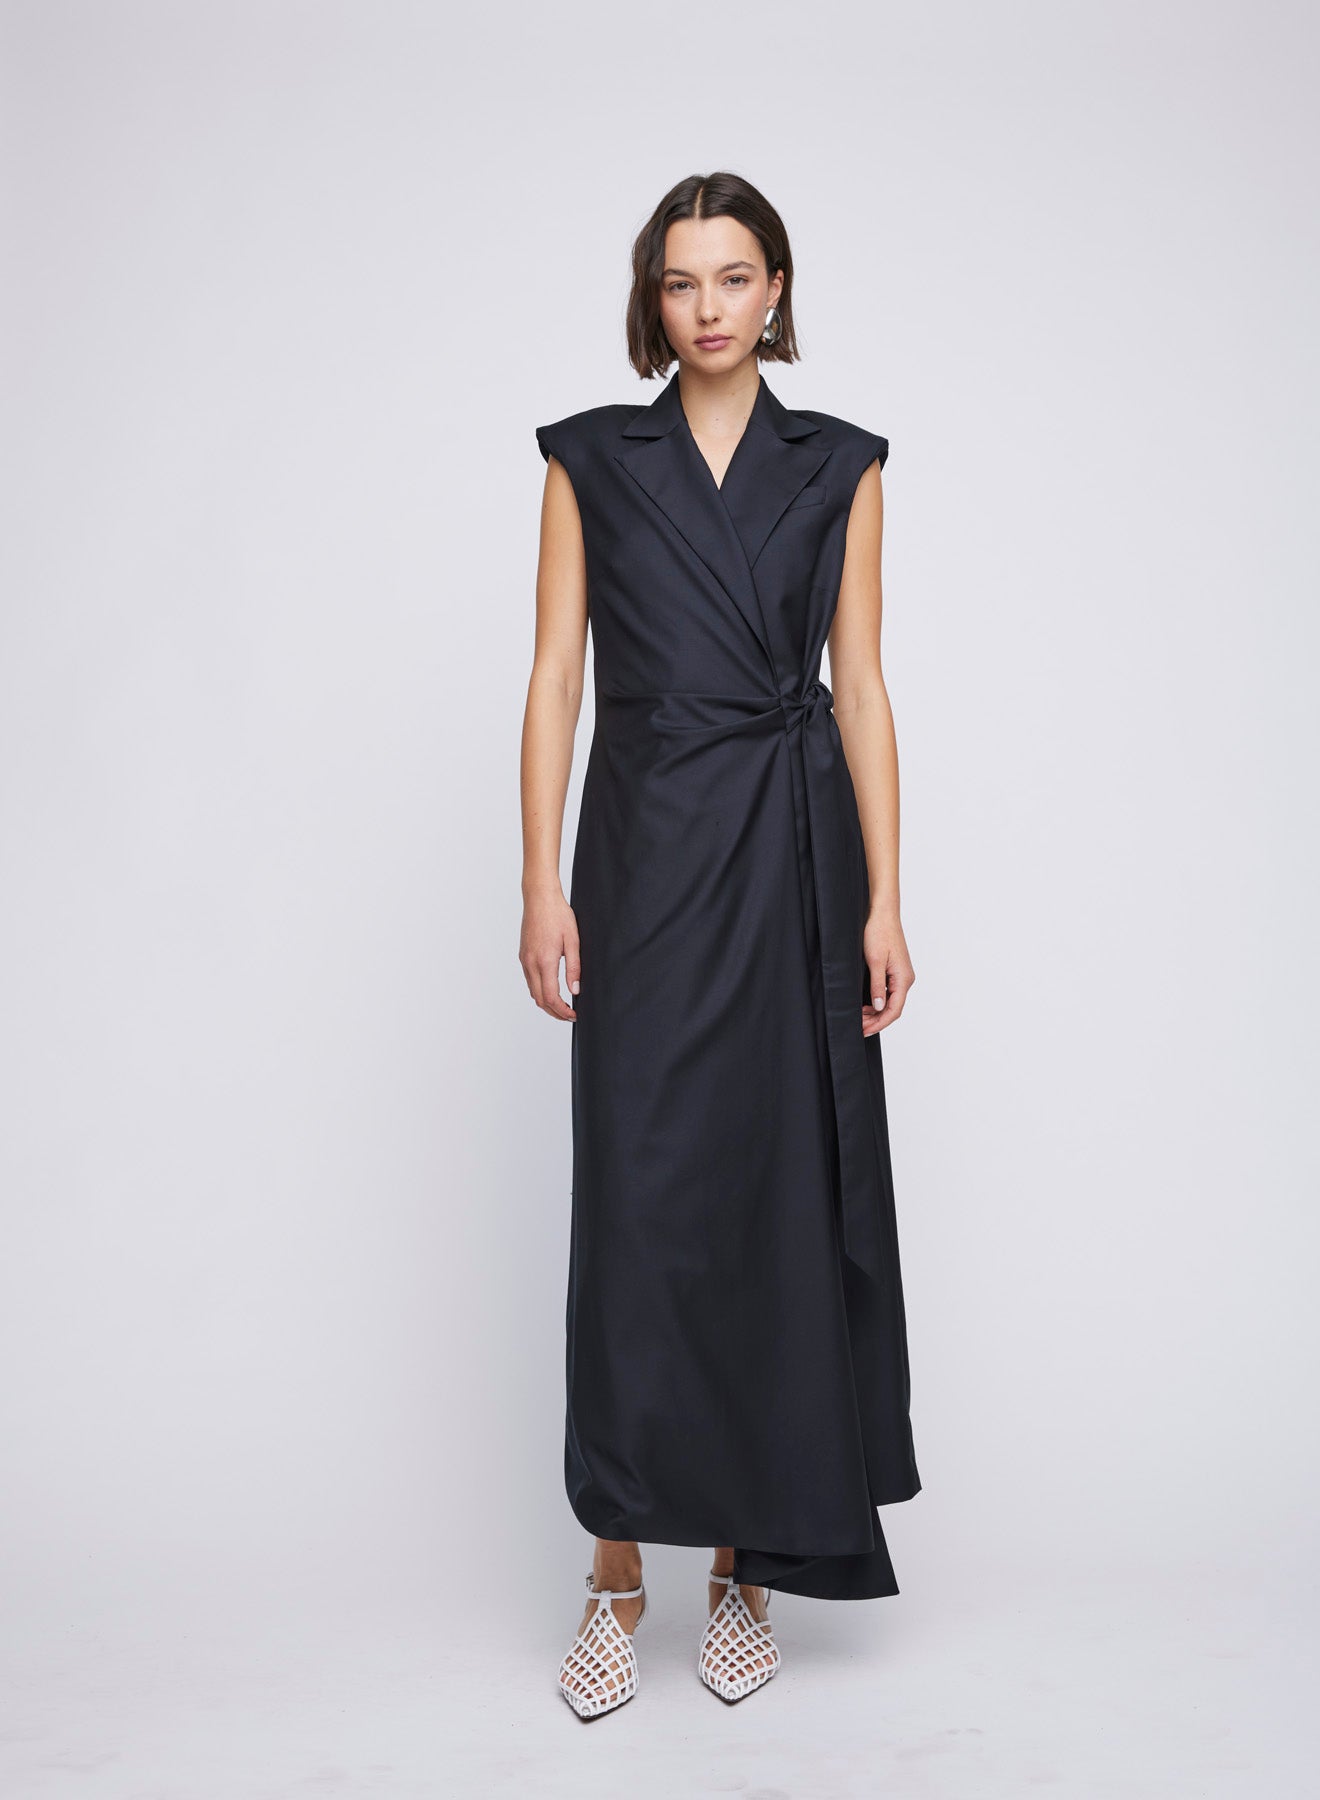 ANNA QUAN Victoria Dress in wrap tailored style. Waist-cinching tie, shoulder pads, v neckline. Ideal for an elegant office-to-dinner ensemble.